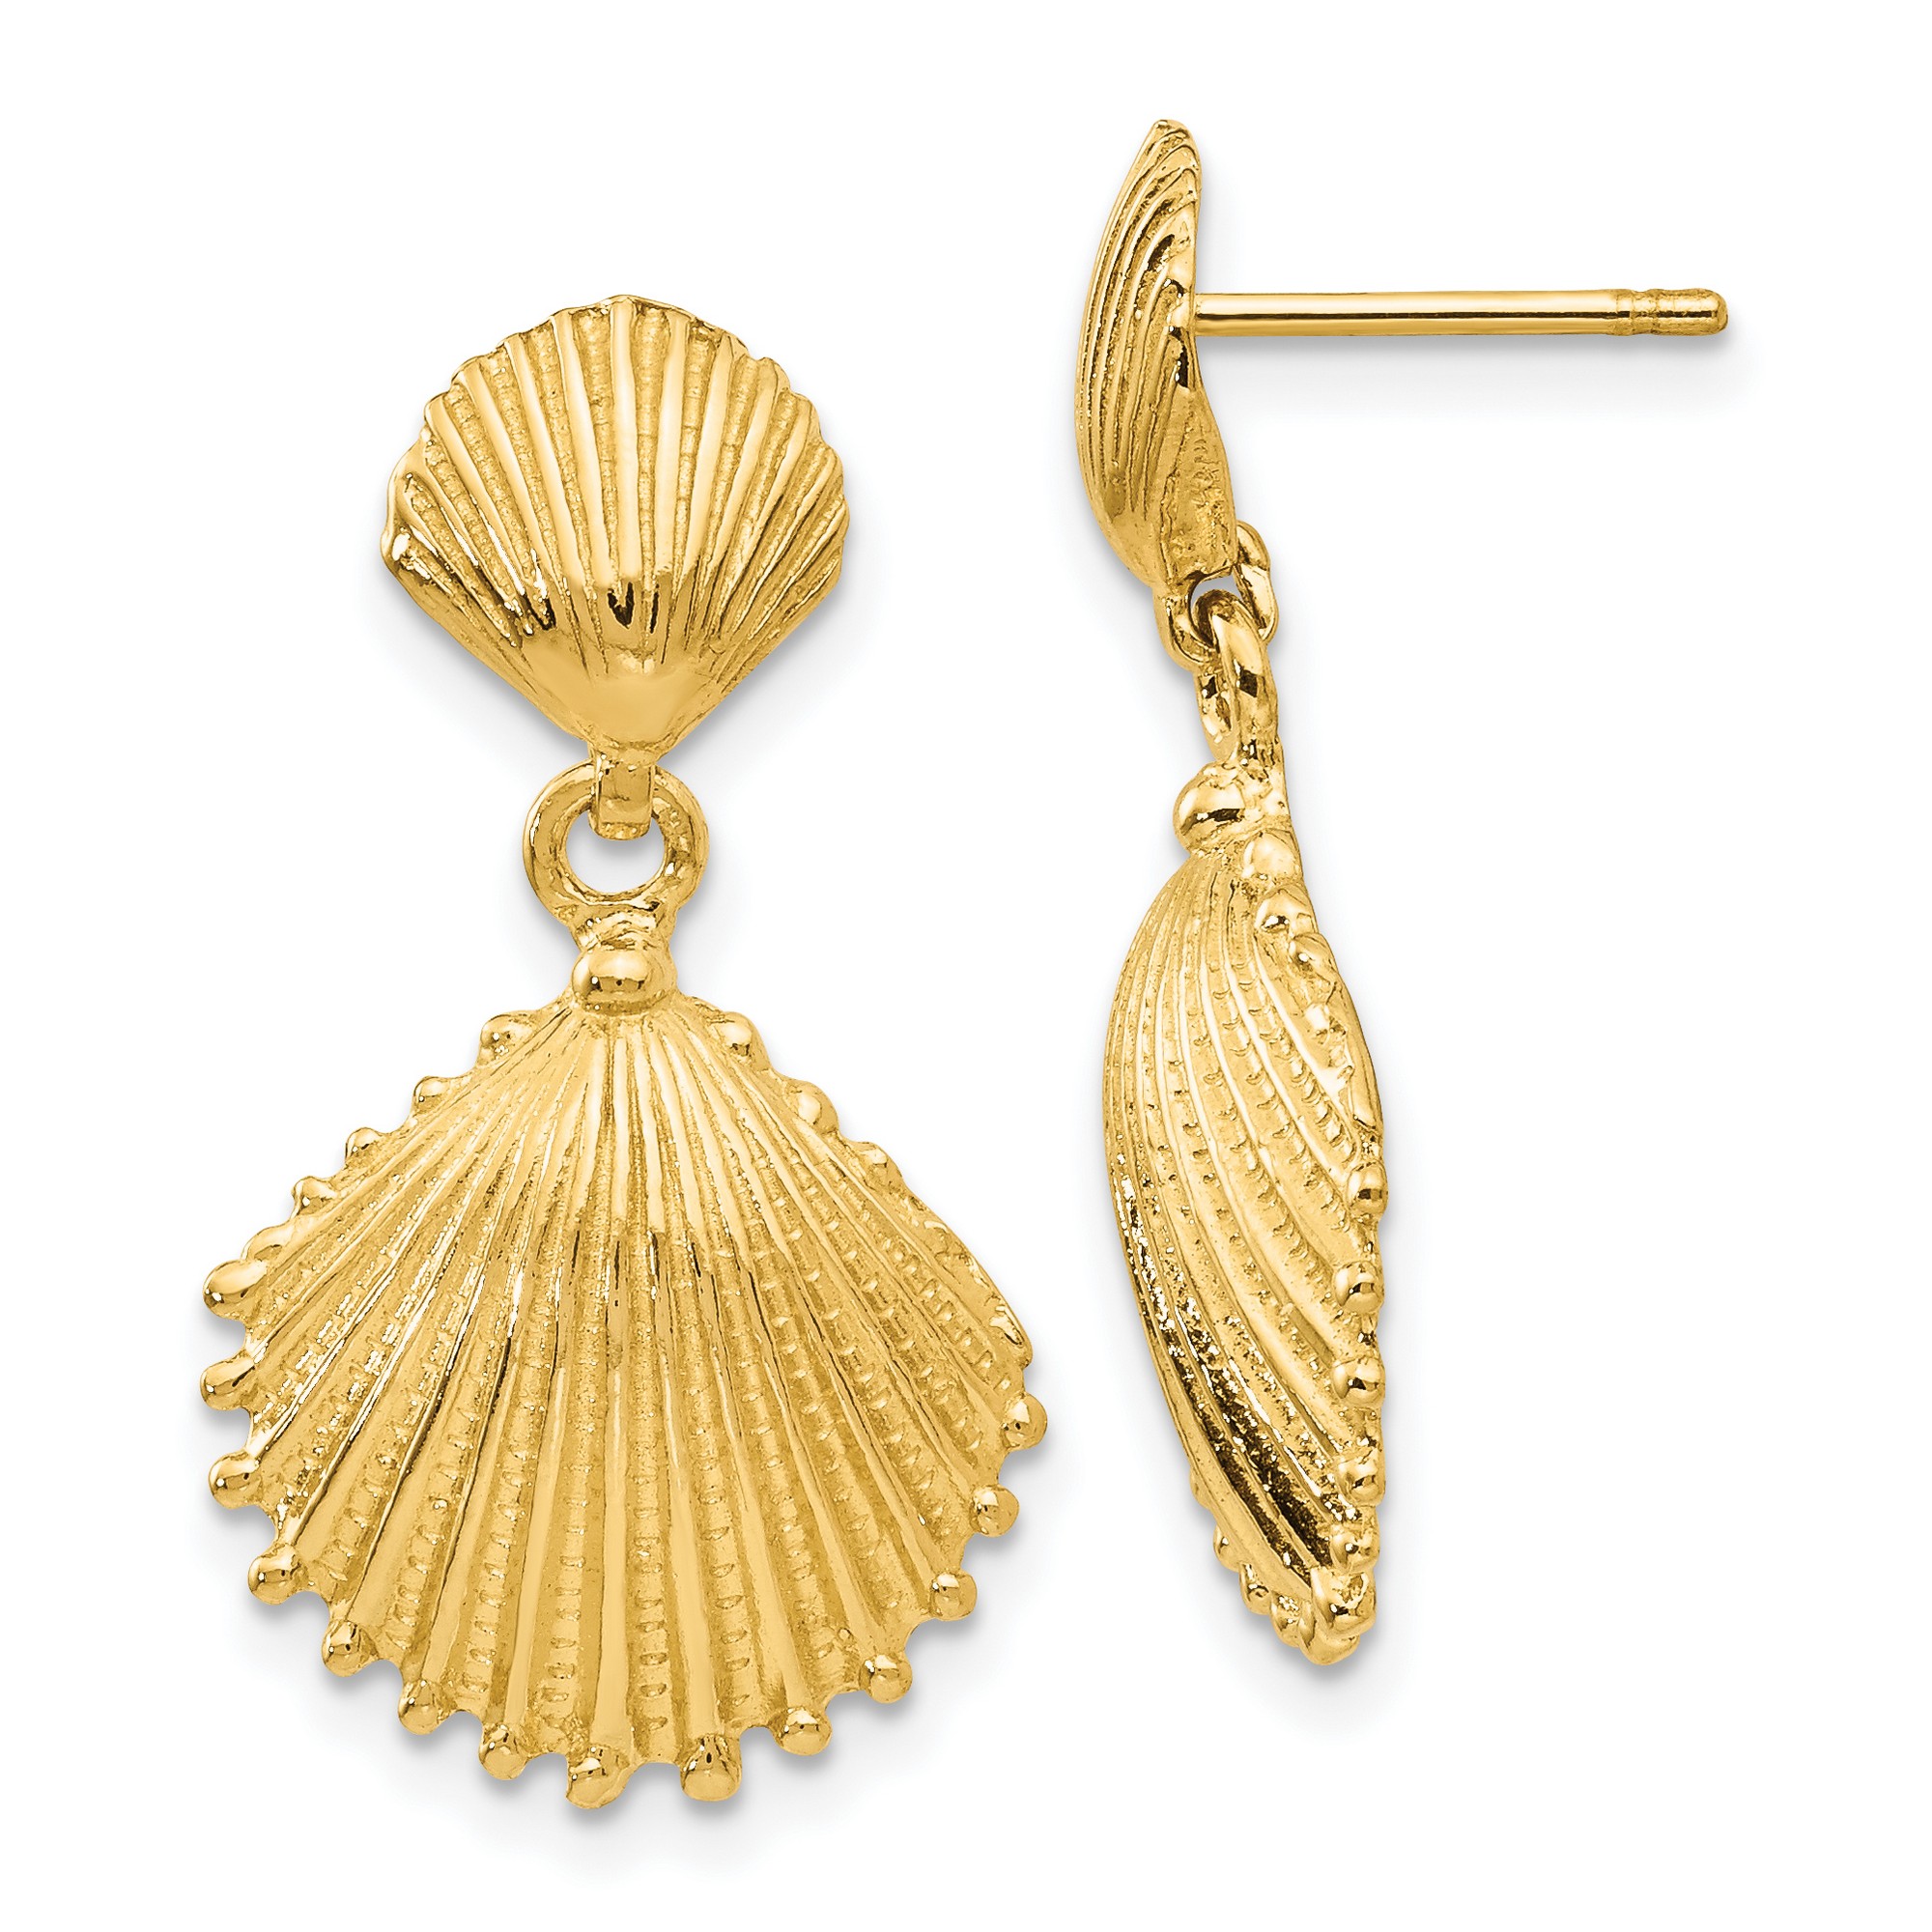 Pre-owned Jewelry Stores Network 14k Yellow Gold Scallop Shell Dangle Post Earrings 26x15 Mm